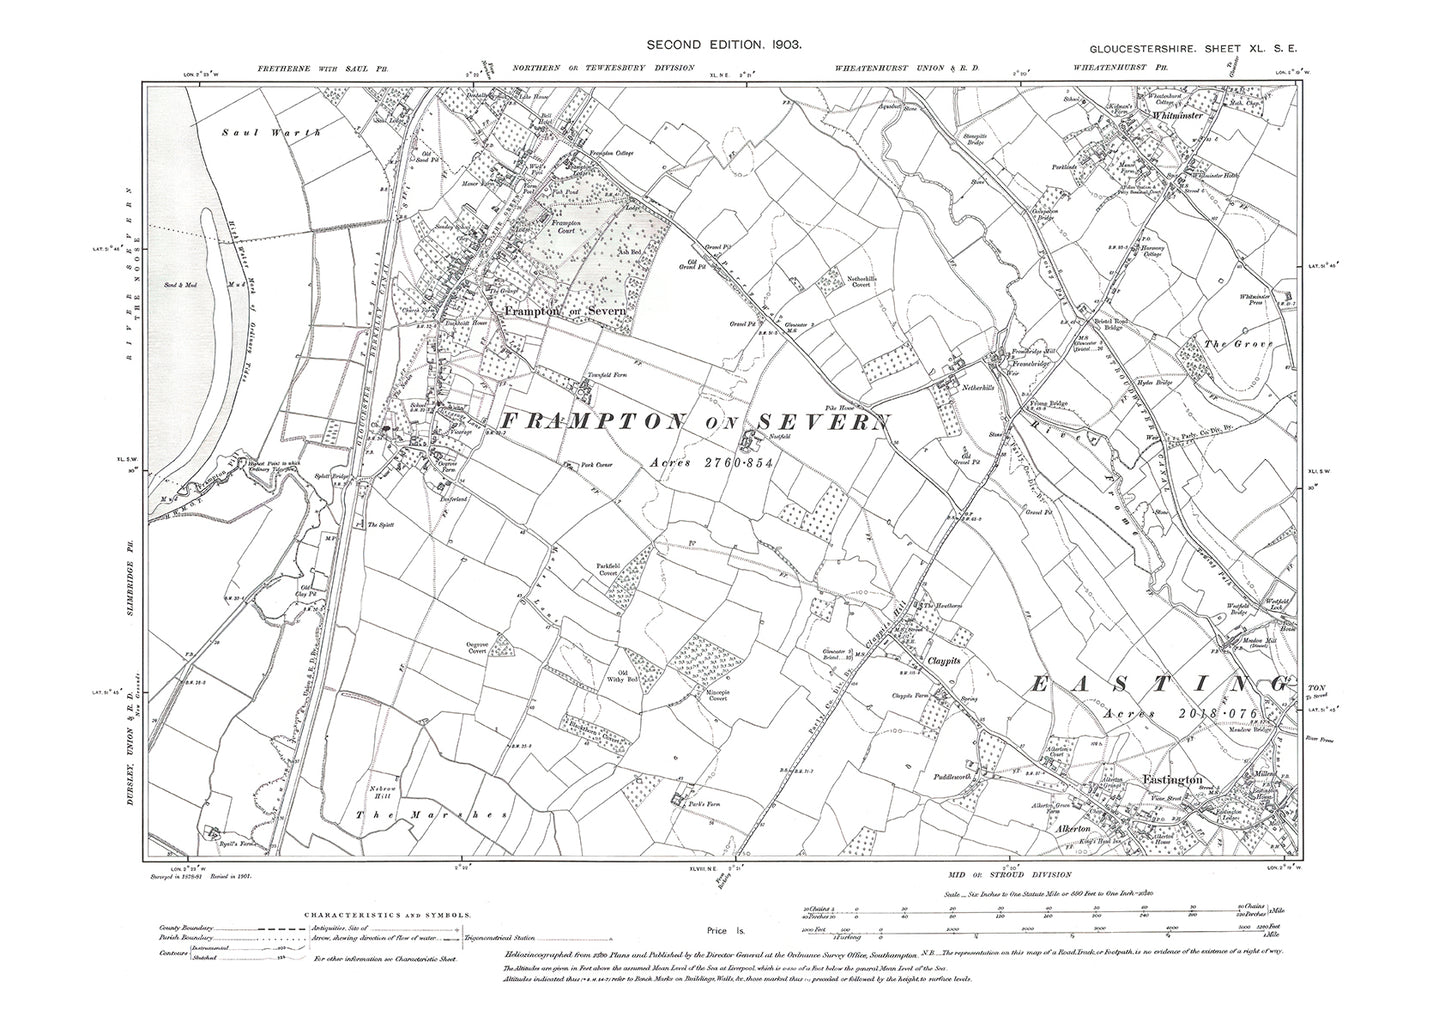 Old OS map dated 1903, showing Frampton, Eastington, Whitminster in Gloucestershire - 40SE